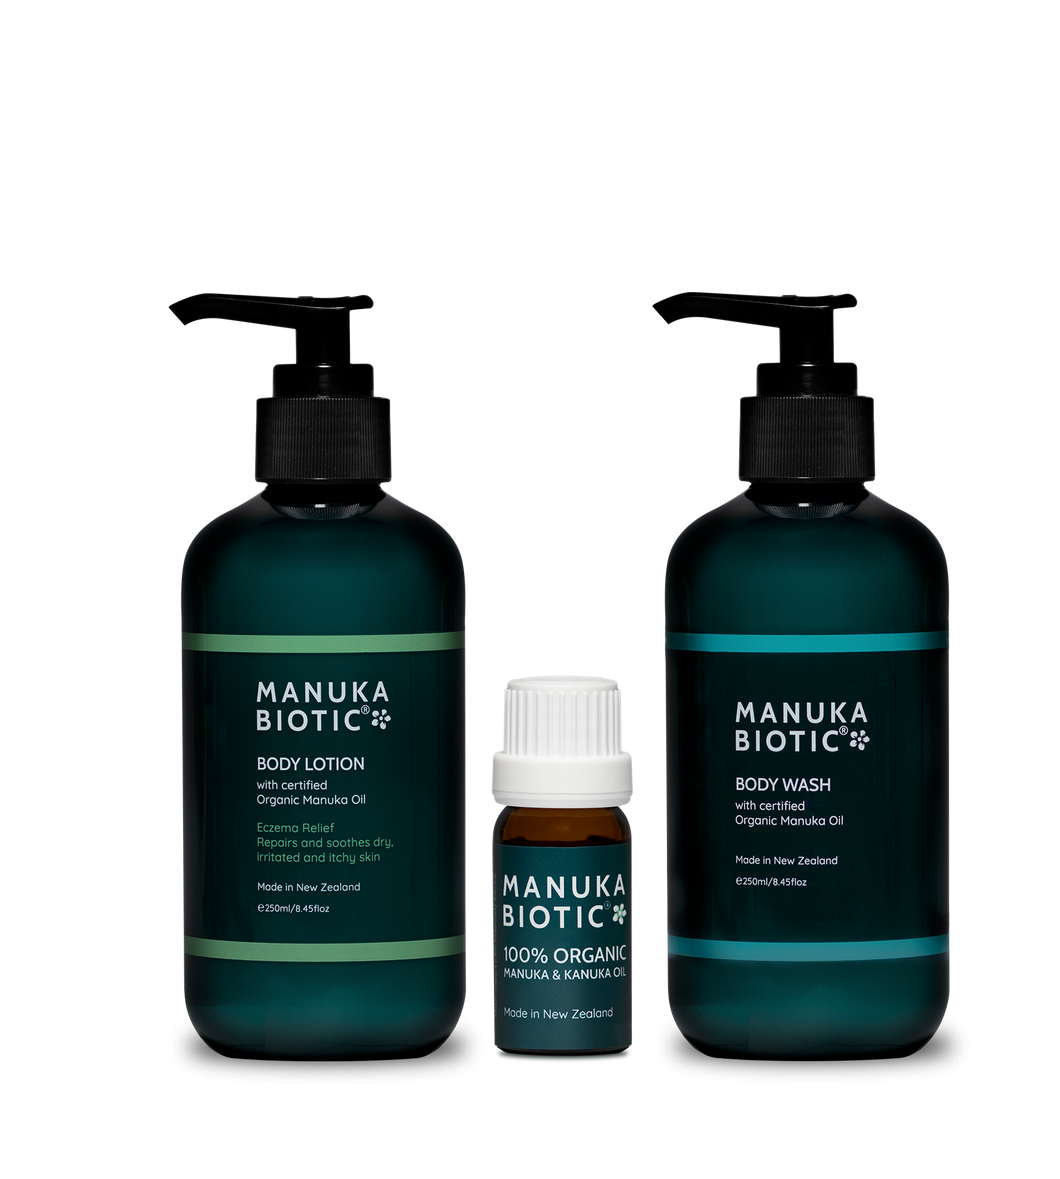 Manuka Biotic products help soothe and relieve skin conditions